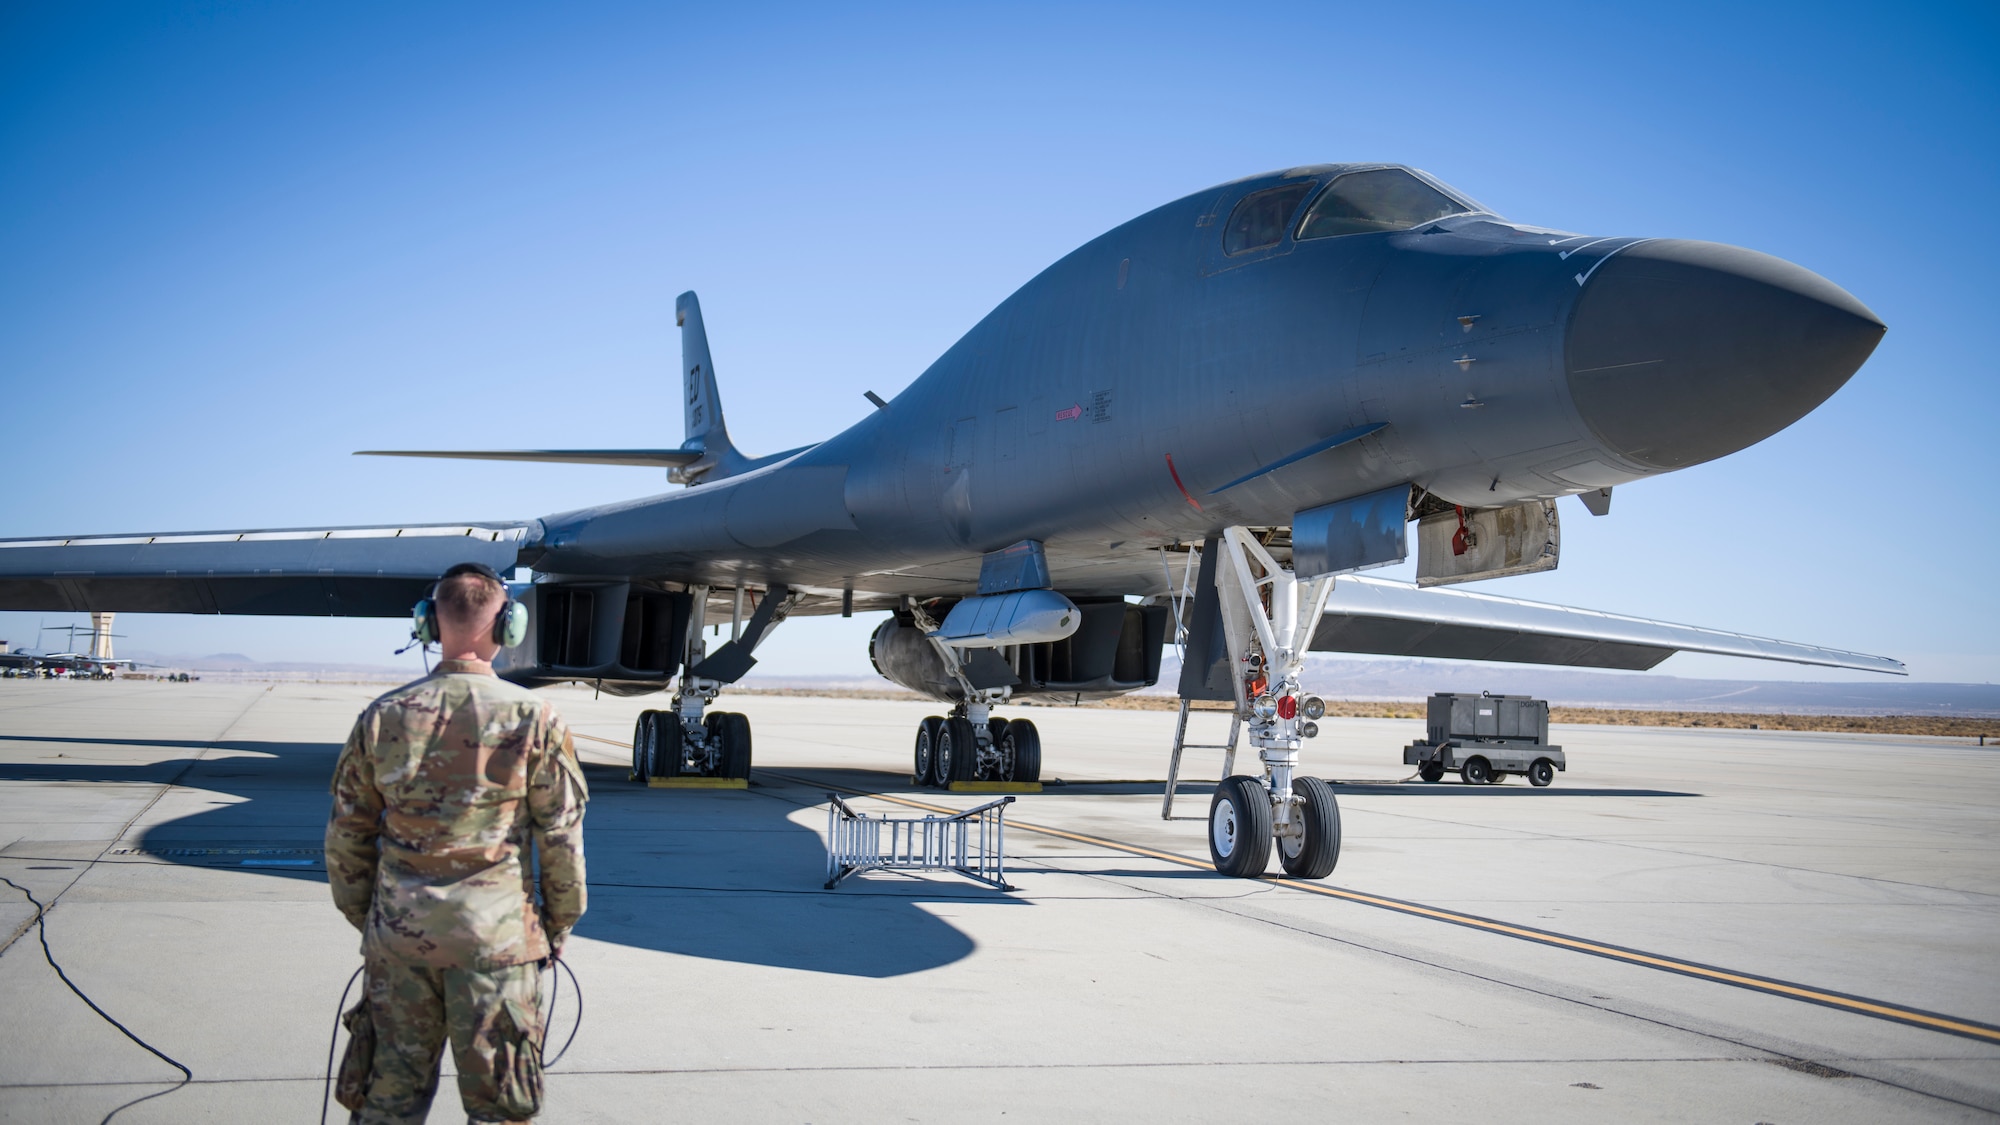 A B-1B Lancer with a Joint Air-to-Surface Standoff Missile (JASSM) undergoes pre-flight procedures prior to a captive carry external weapons demonstration flight at Edwards Air Force Base, California, Nov. 17. (Air Force photo by Giancarlo Casem)